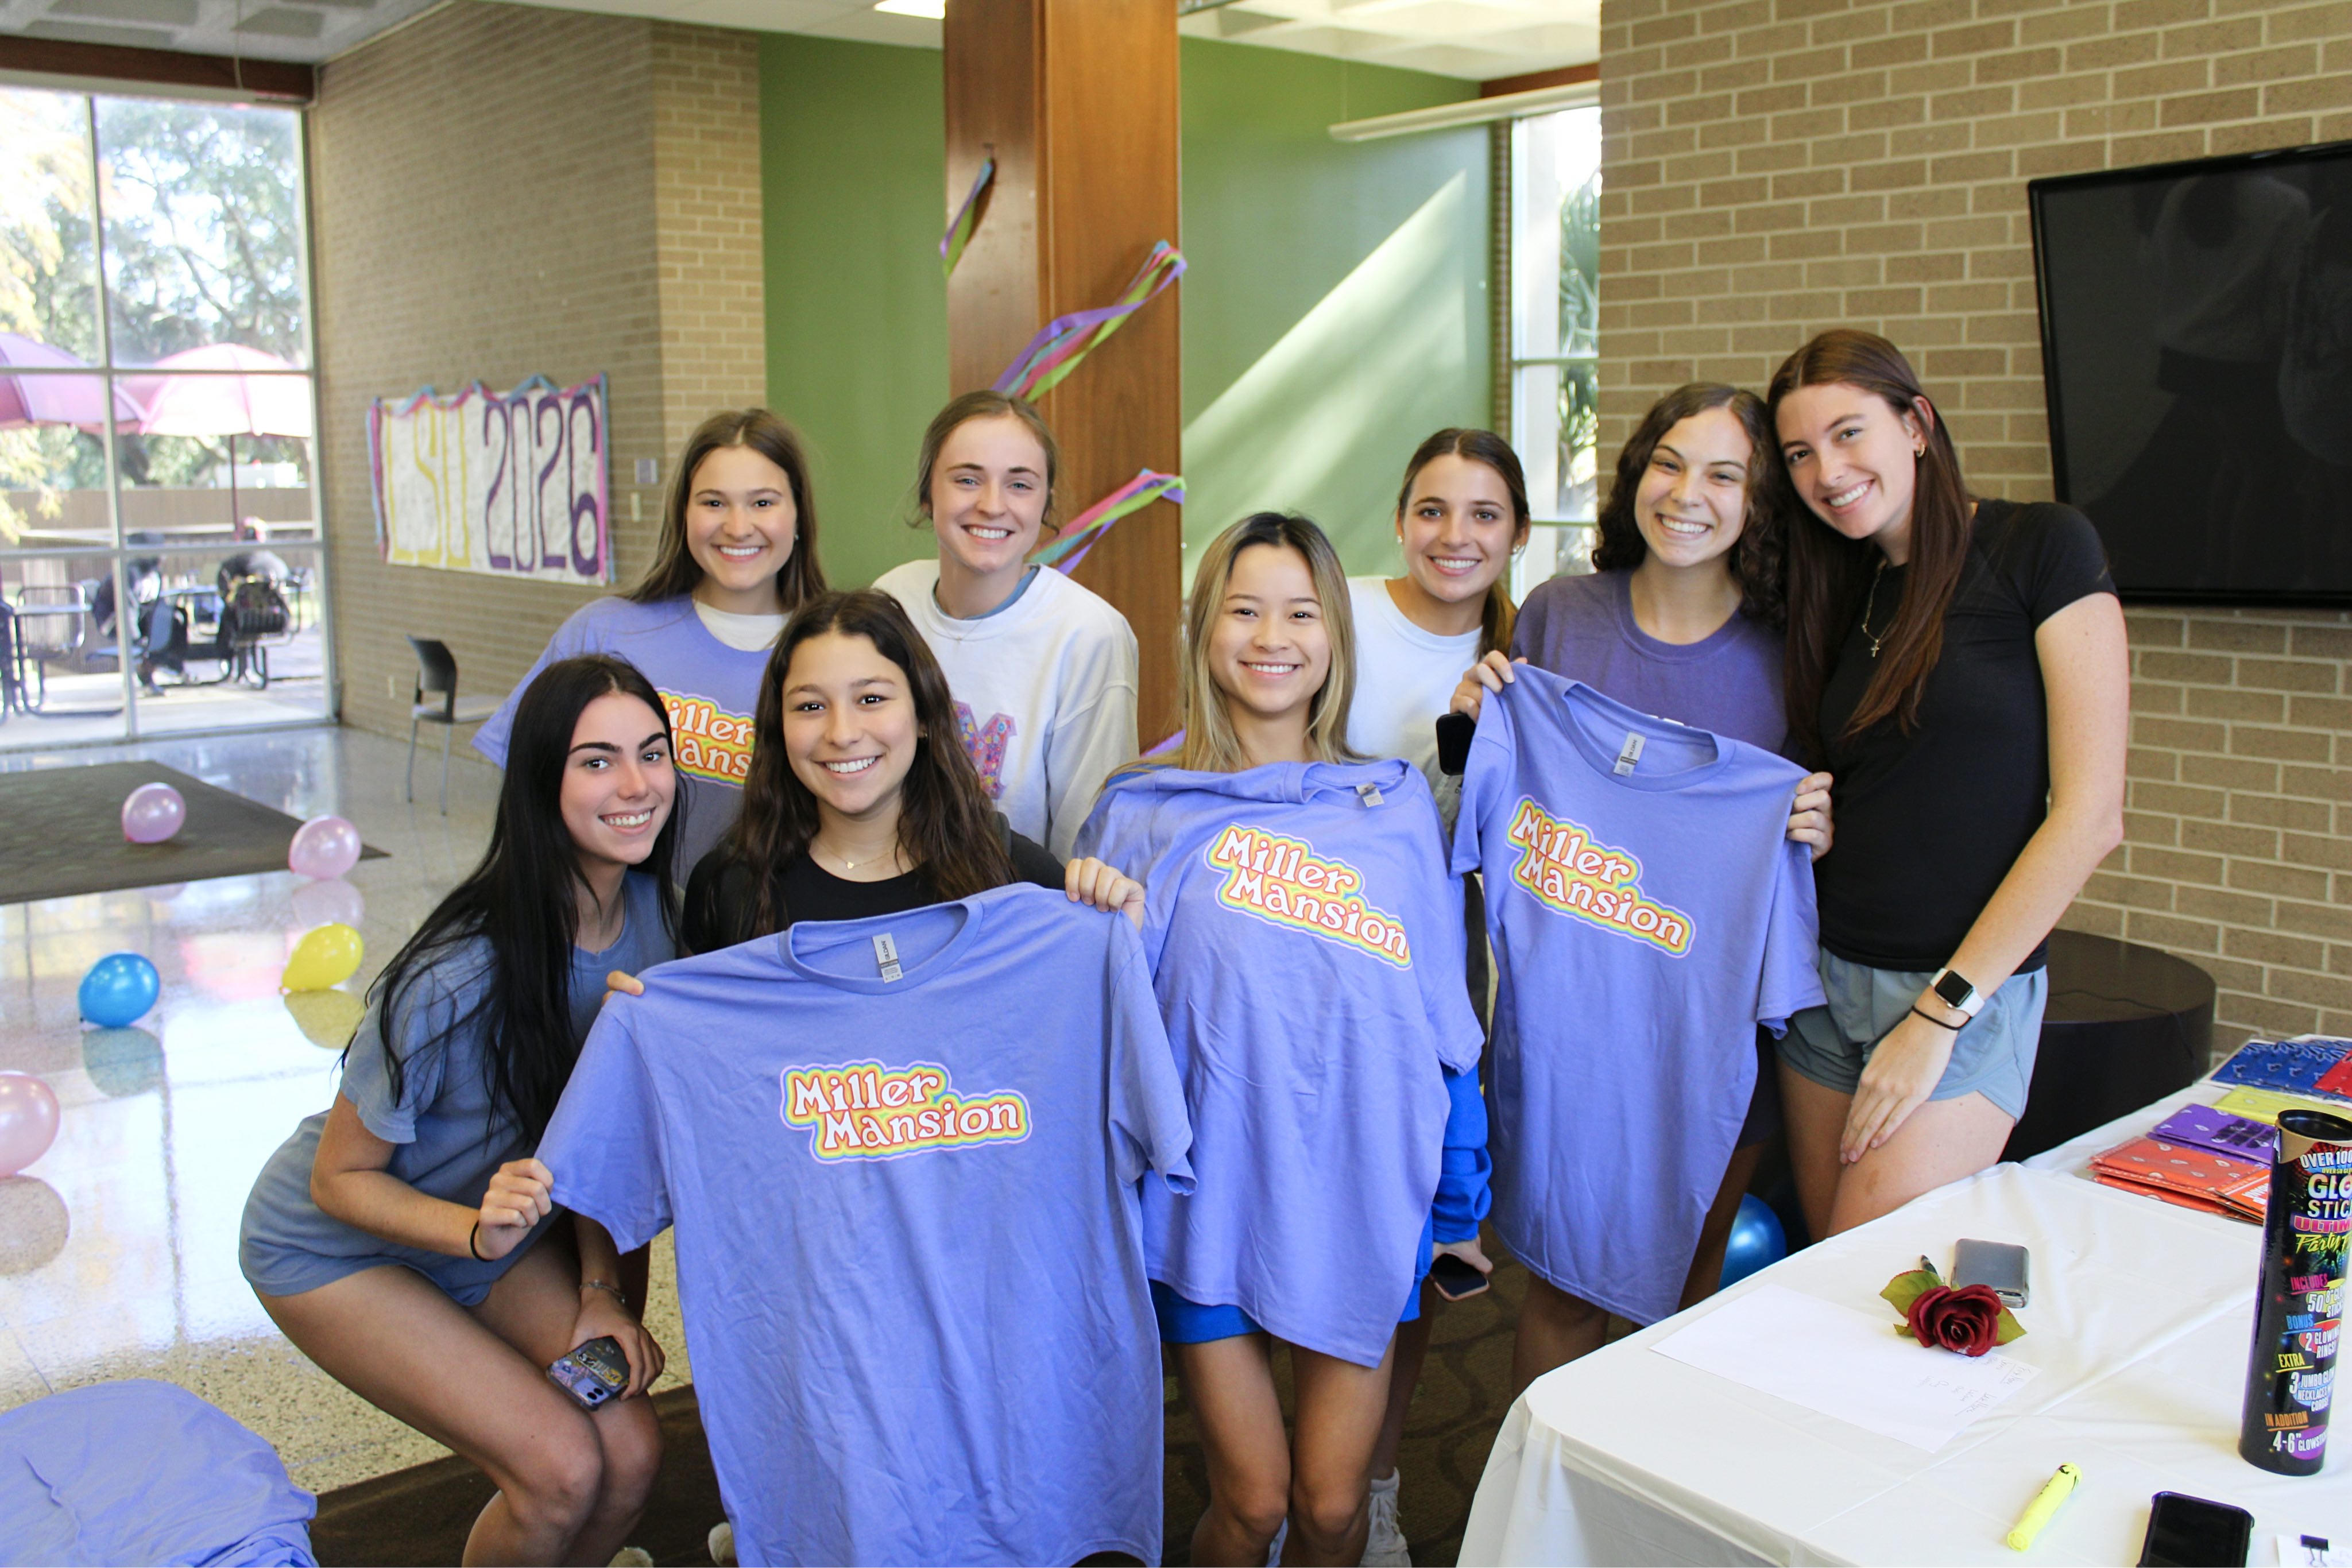 Miller Hall residents posing with new shirts that say Miller Mansion.